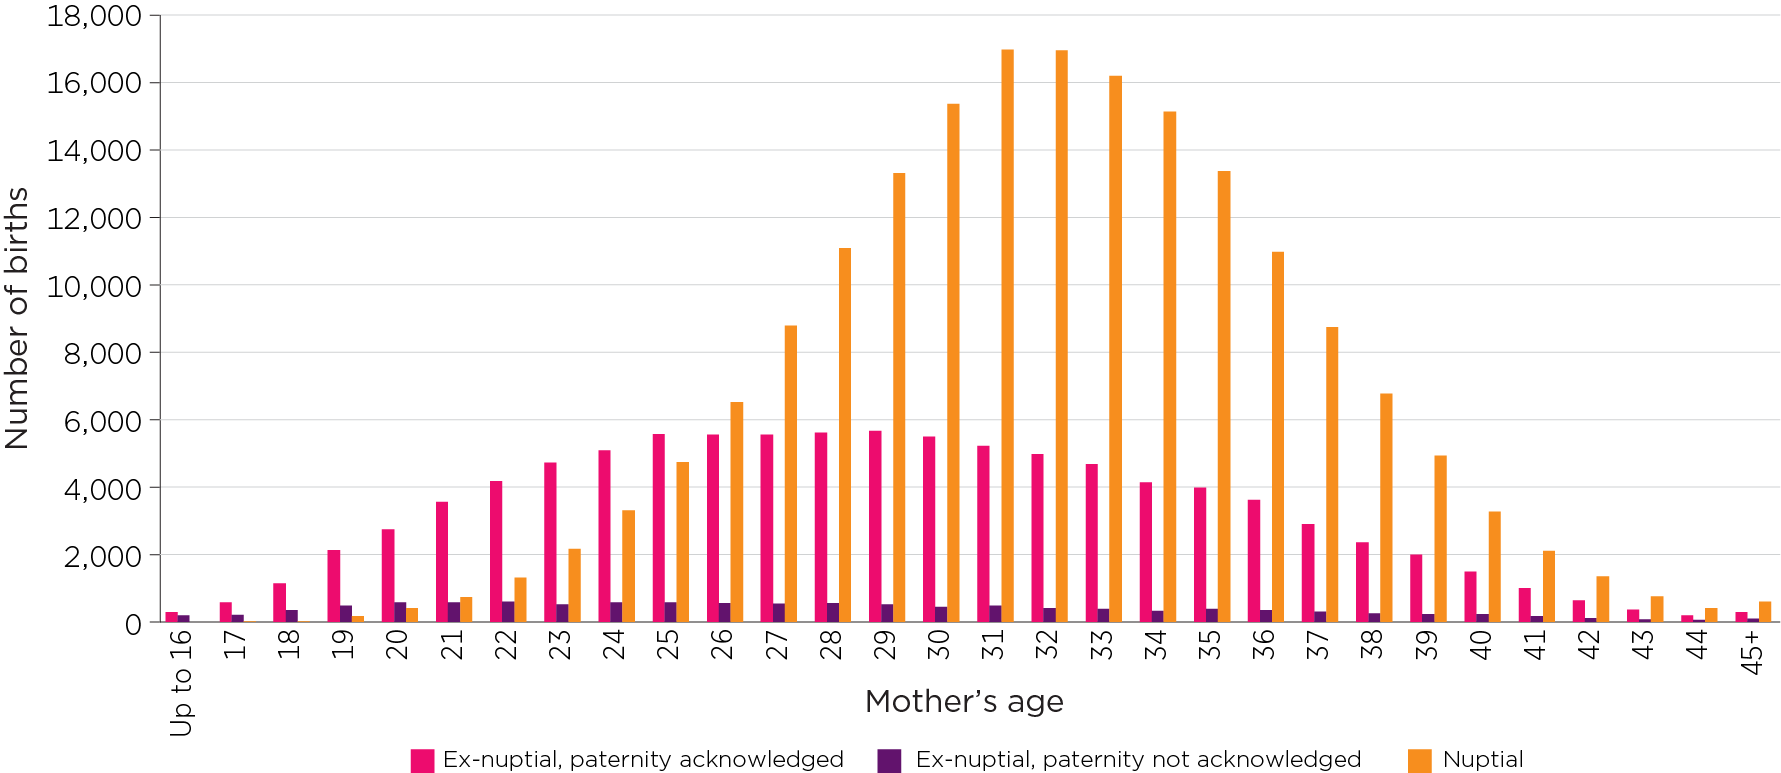 Figure 6: Number of births by nuptial/paternity acknowledgement status and age of mothers, 2020.